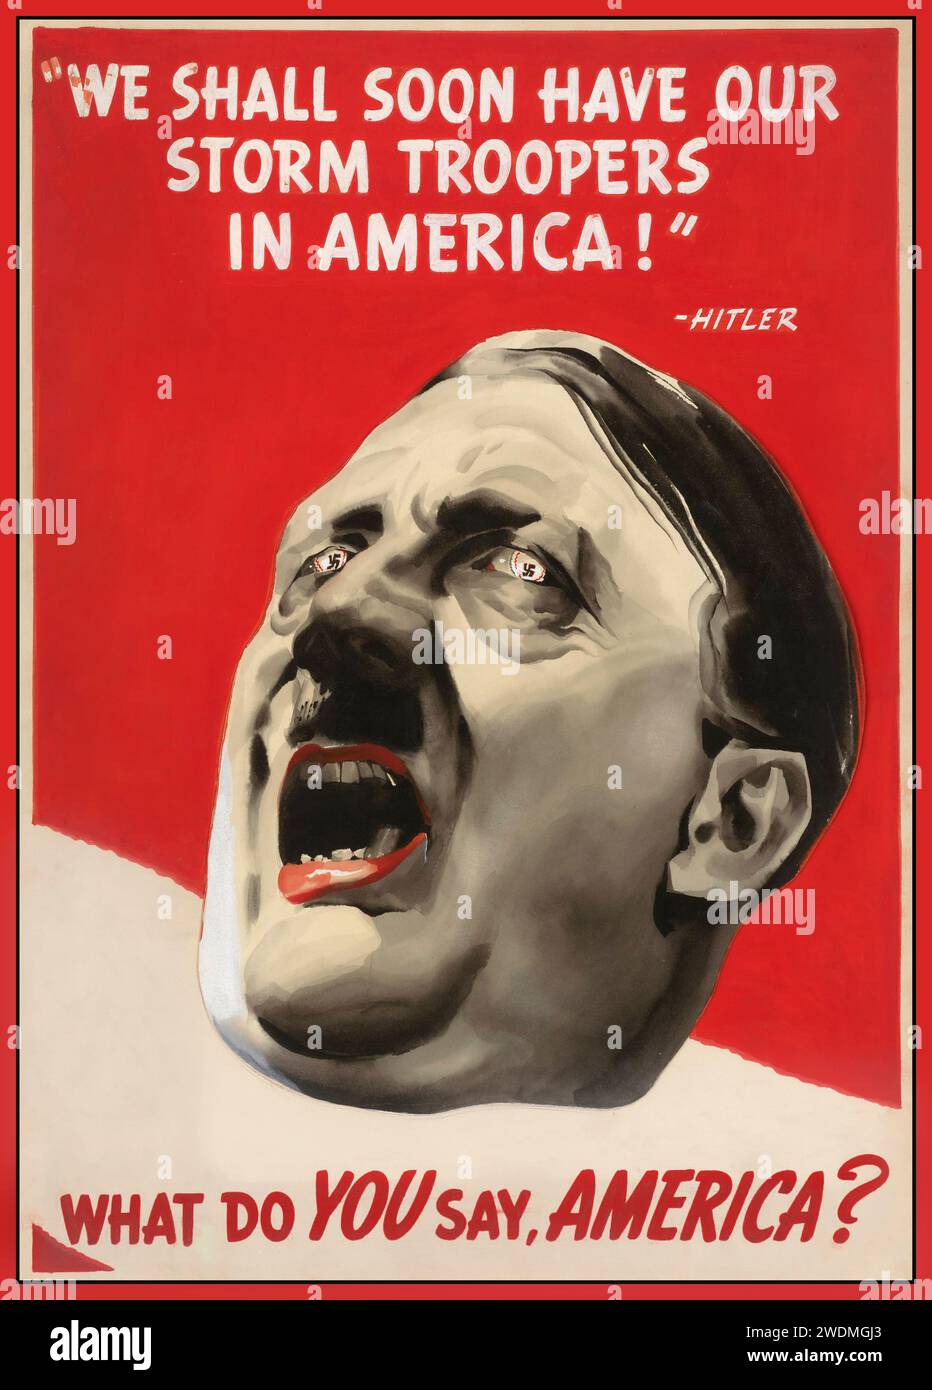 ADOLF HITLER DEMONIC ILLUSTRATION 1940s WW2 Propaganda Poster illustrating a demonic Adolf Hitler saying 'We shall soon have our Storm Troopers in America' World War II Second World War America USA Stock Photo